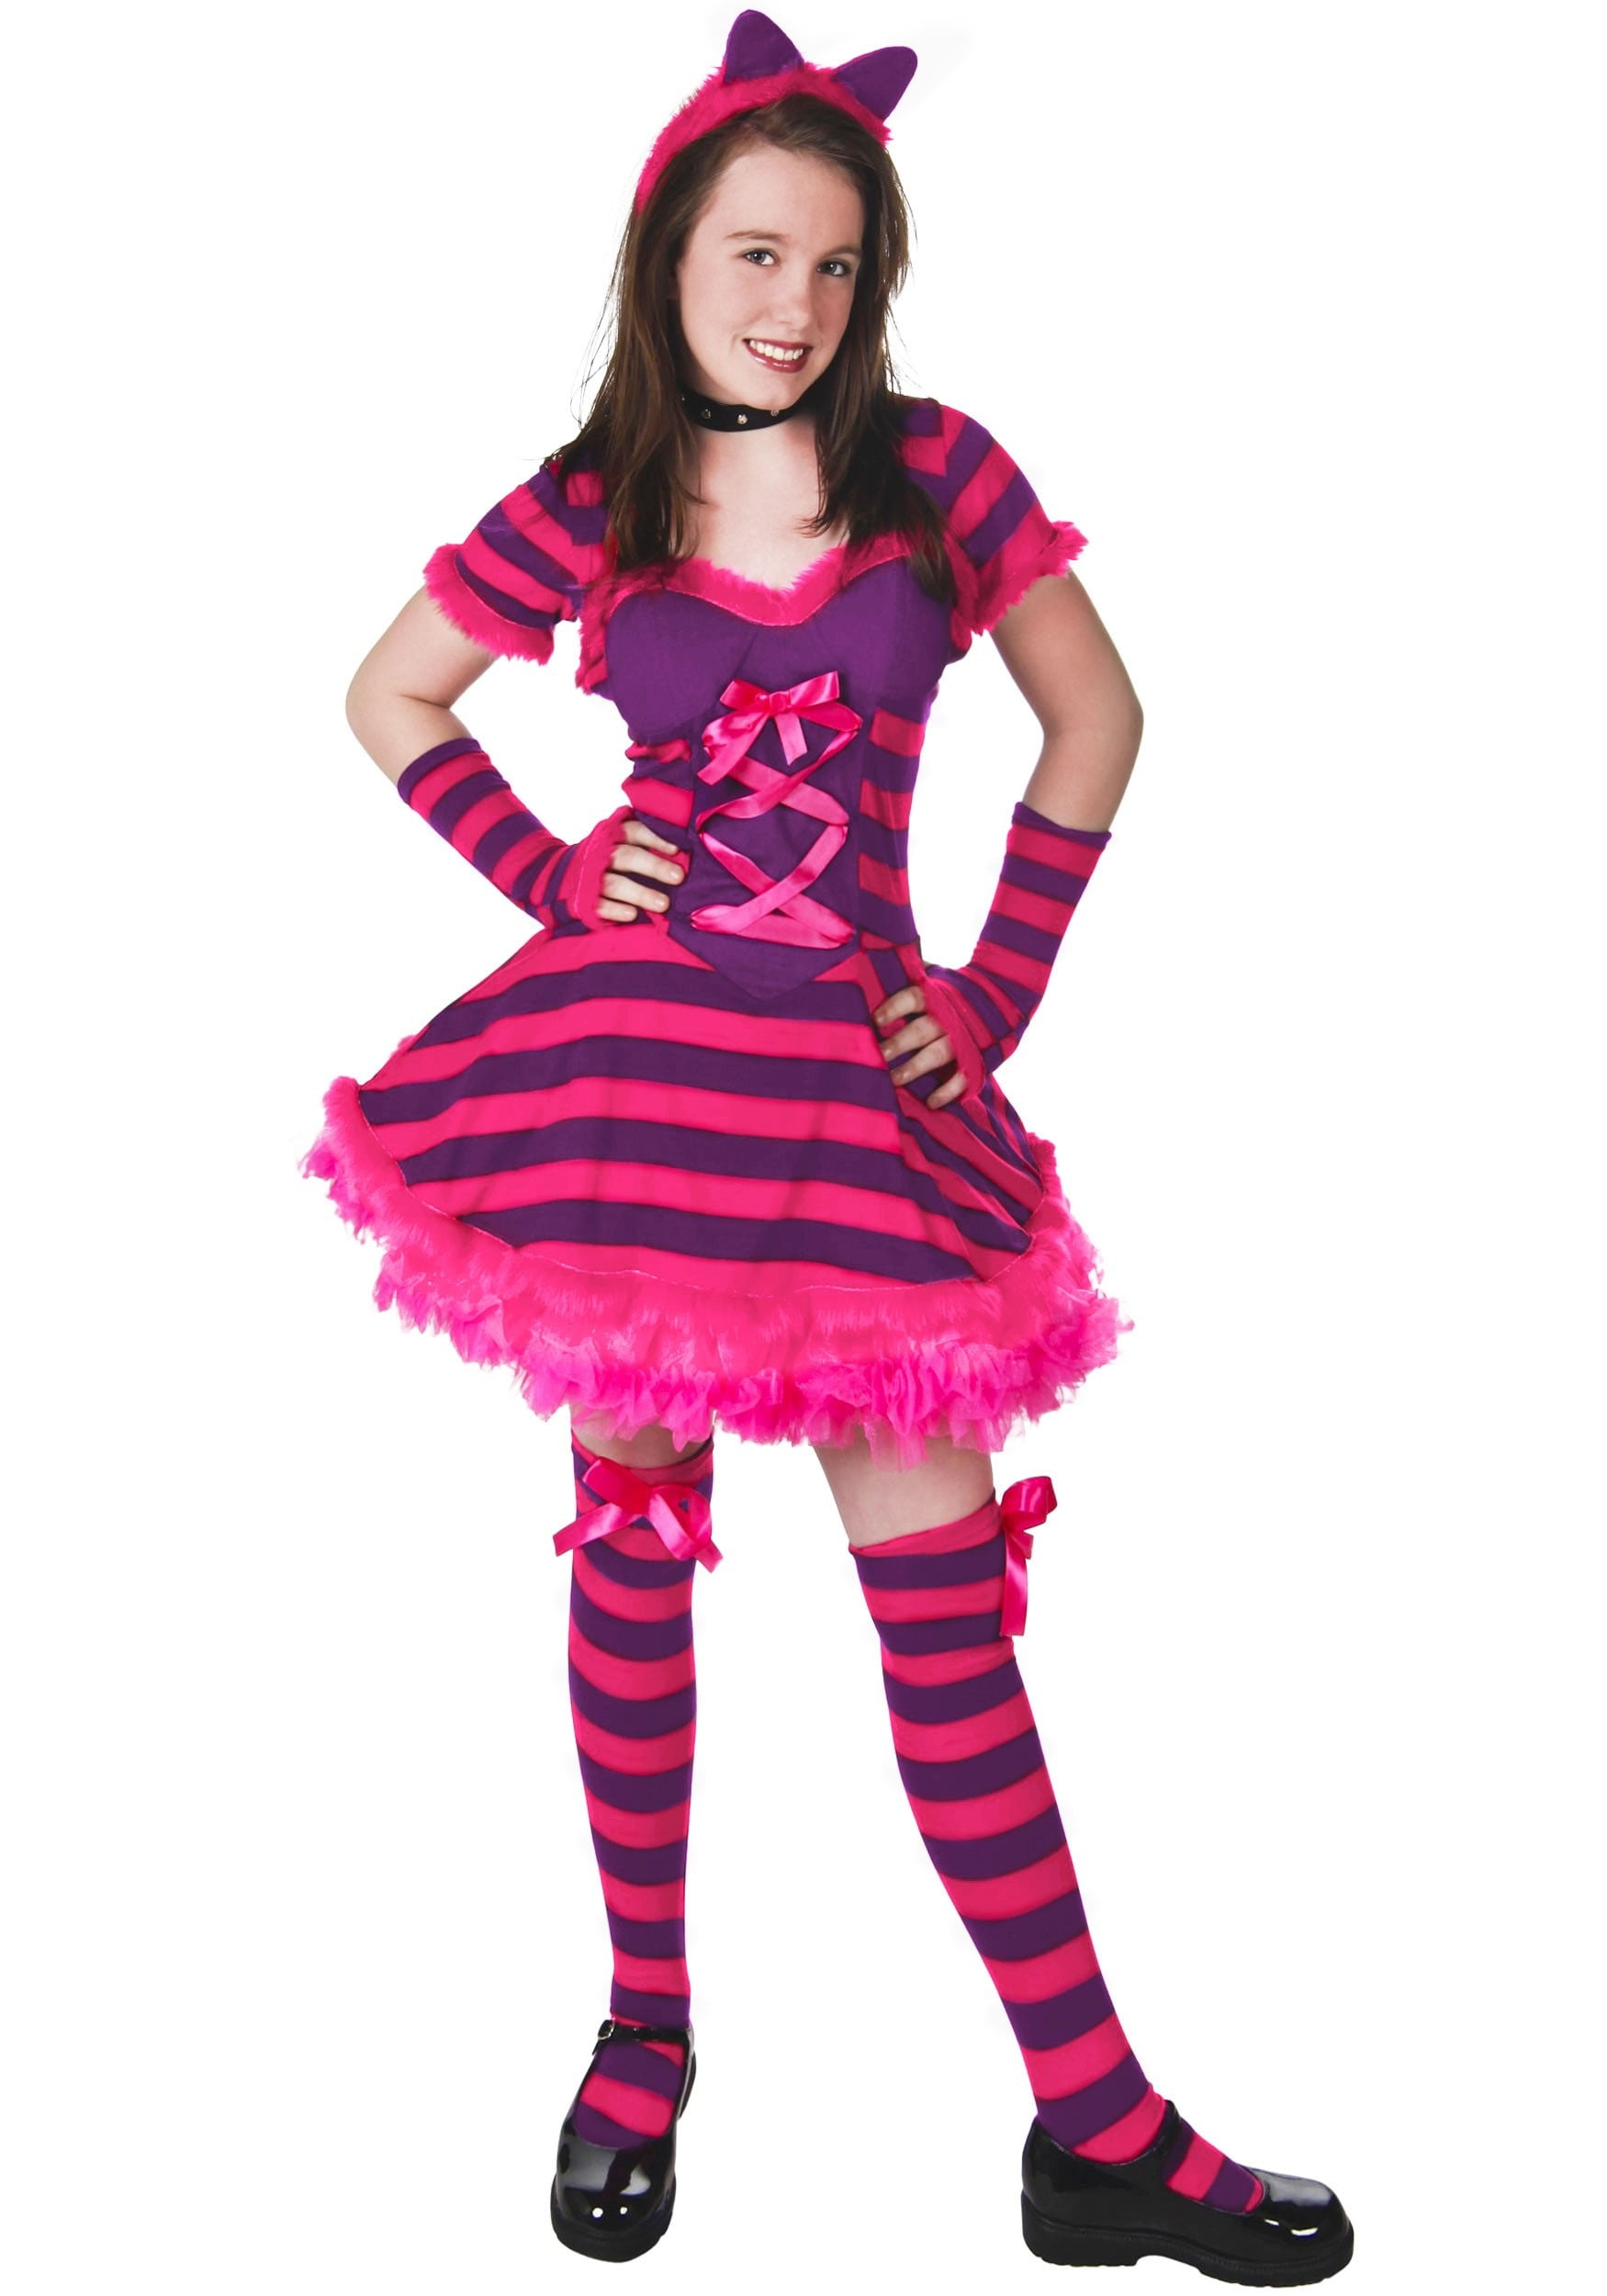 cute cheshire cat costume She came to the Capitol demanding that me and Rep...